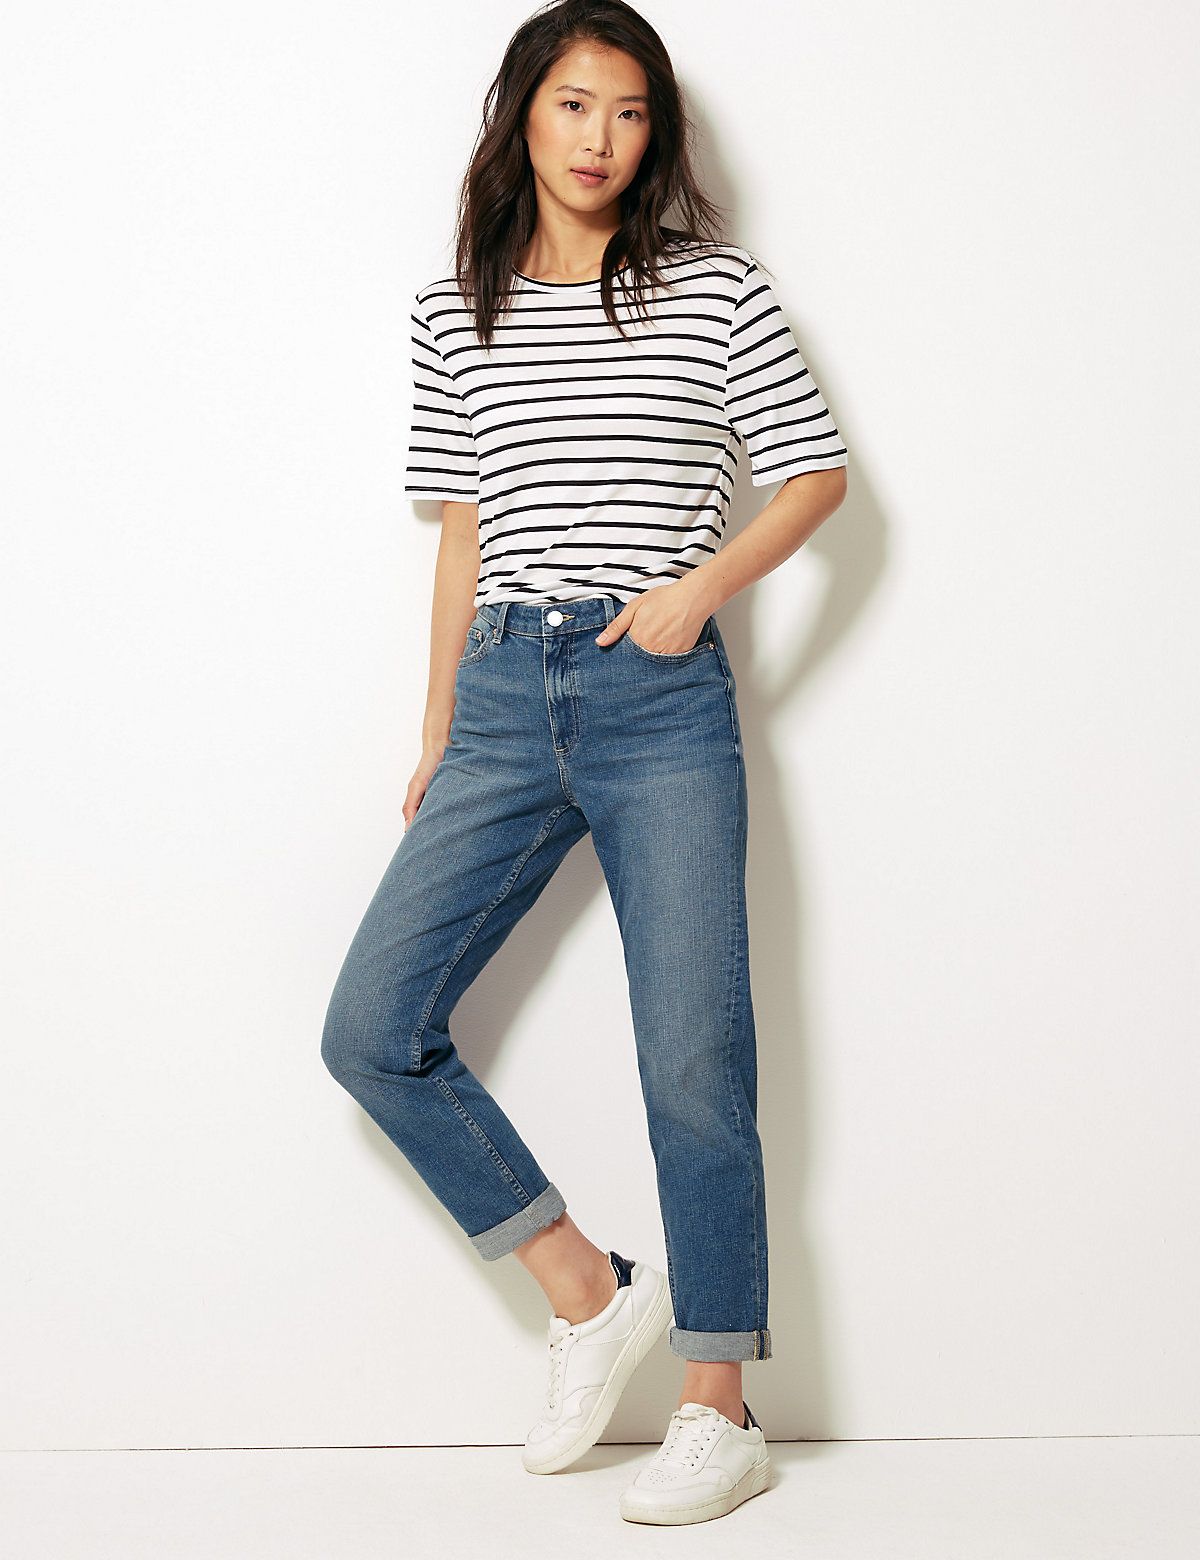 m&s mid rise skinny jeans